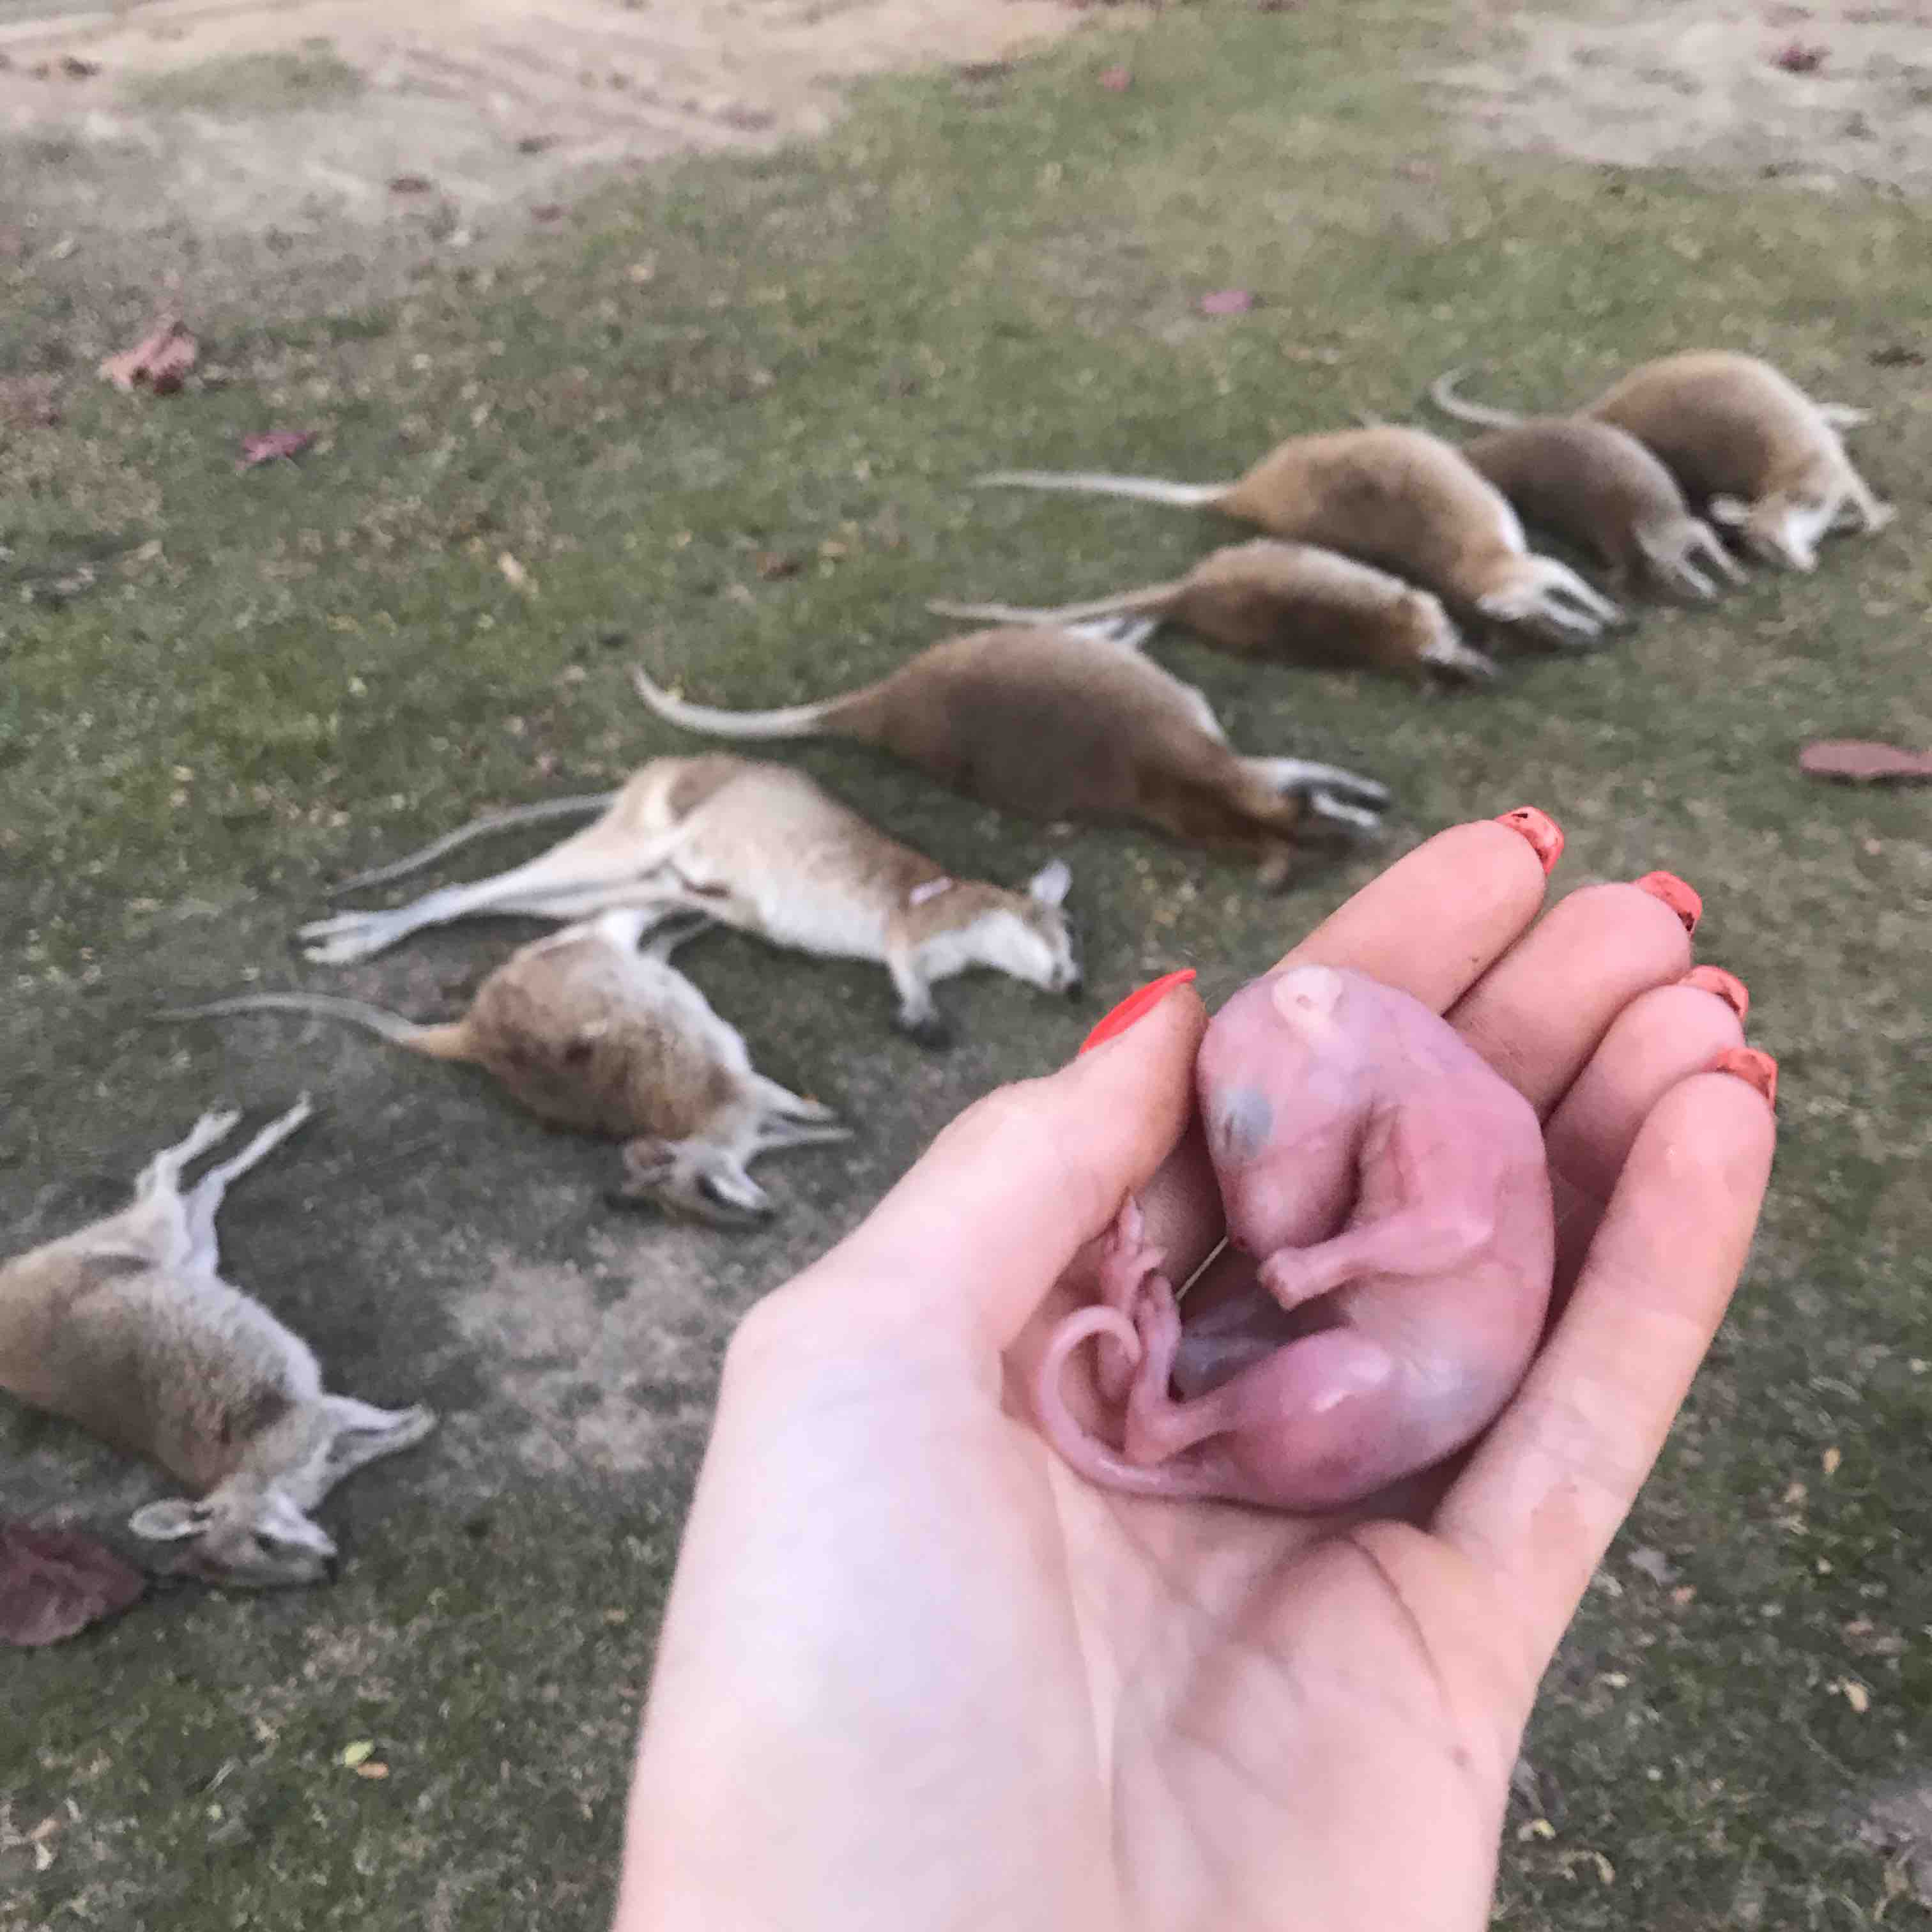 More than 40 wallabies killed in Cairns, within one week. What is happening?